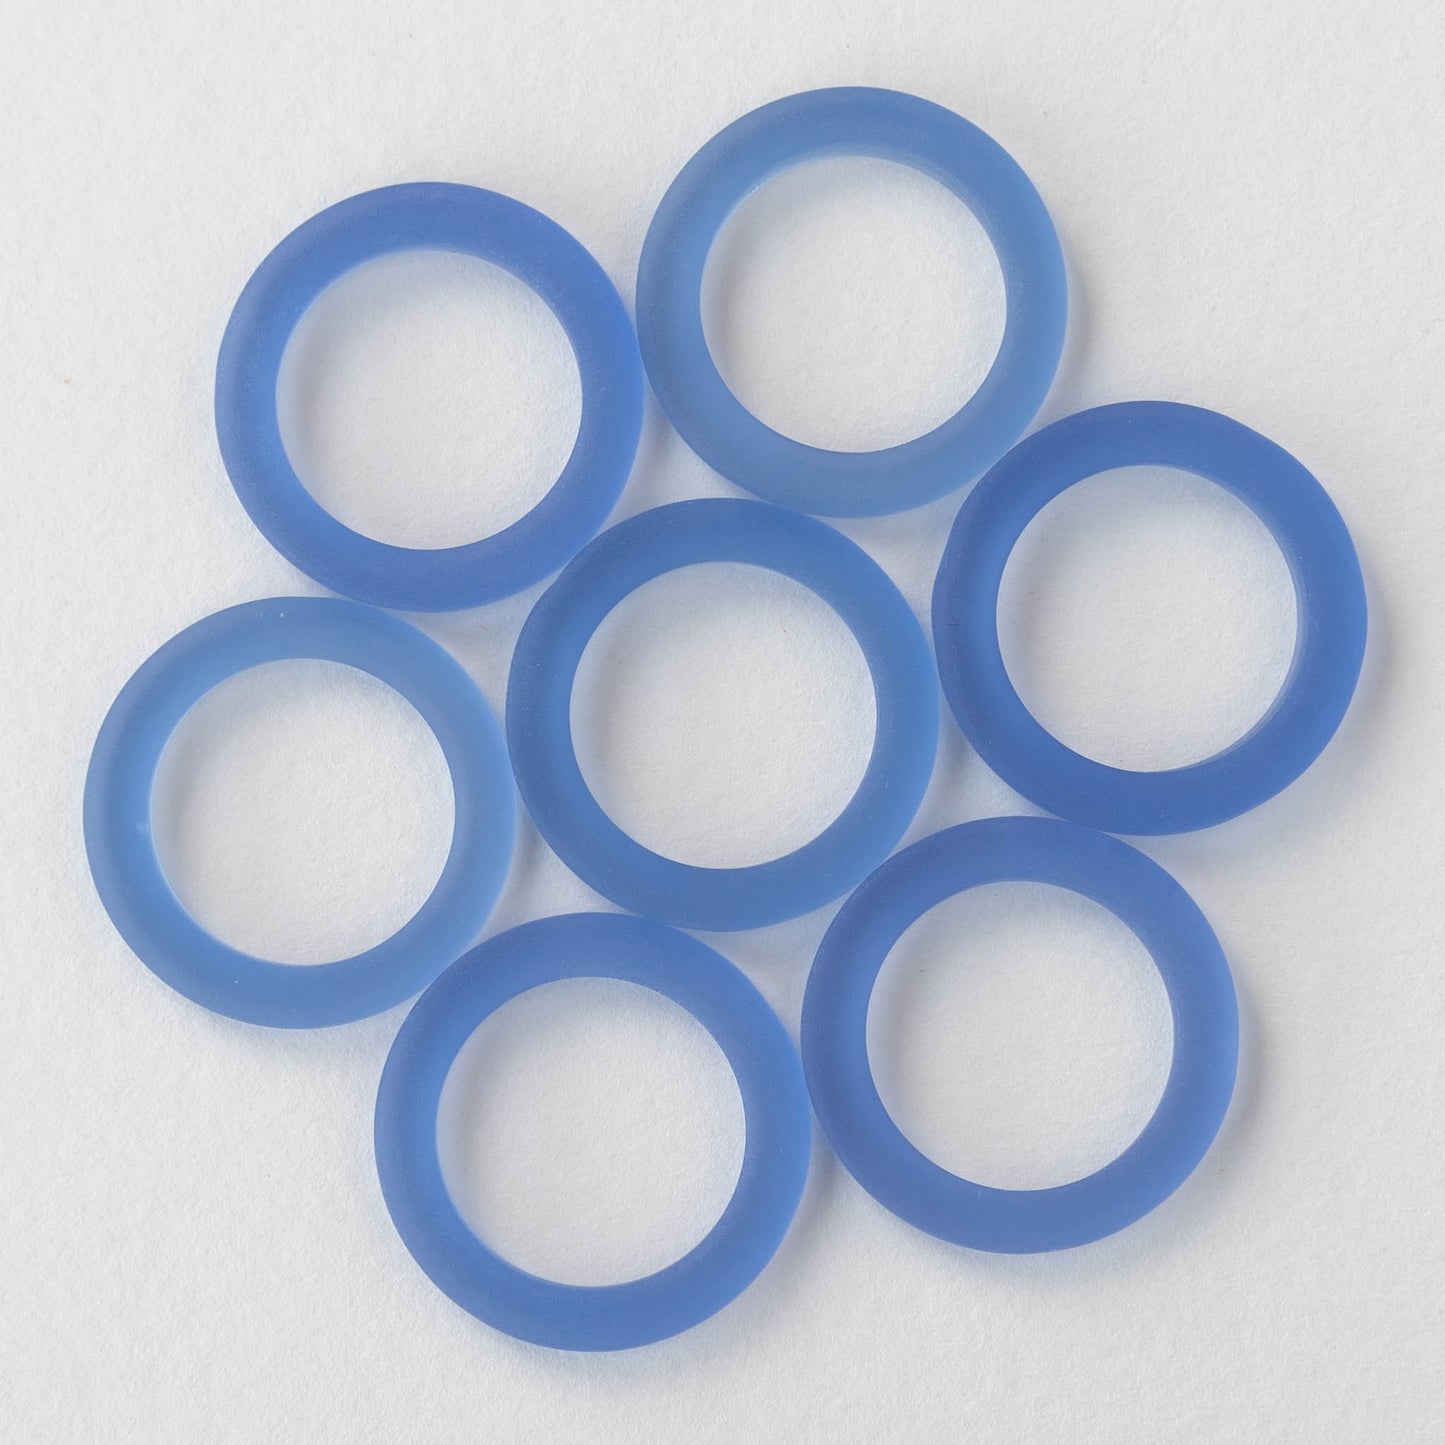 27mm Frosted Glass Rings - Sapphire Blue - 2 Rings